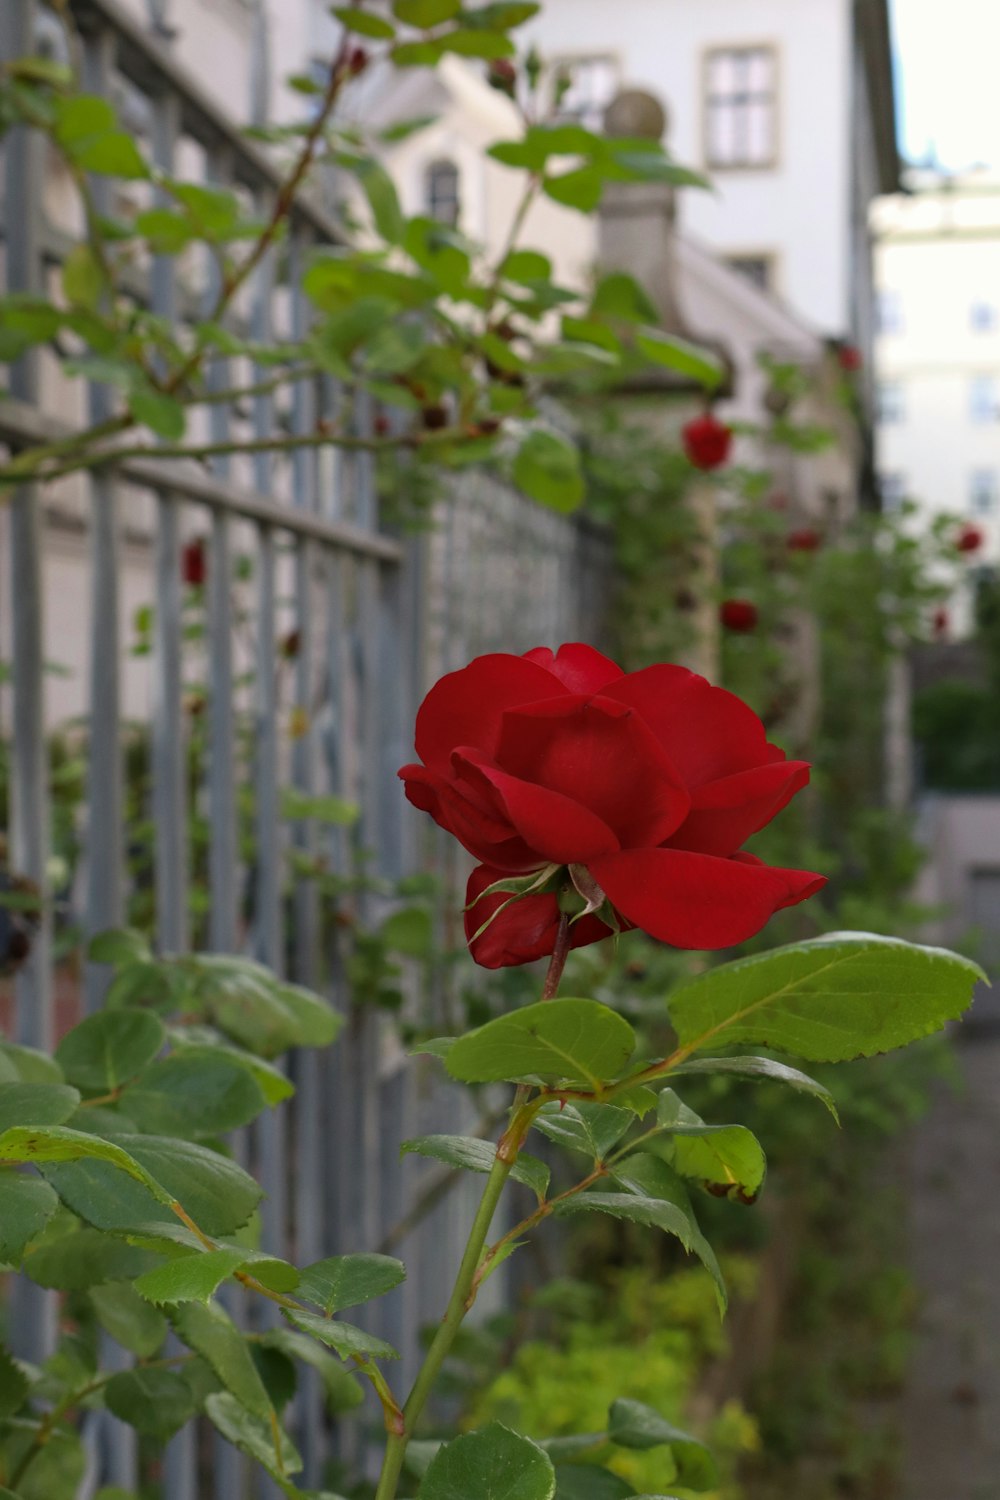 a red rose is blooming in front of a fence